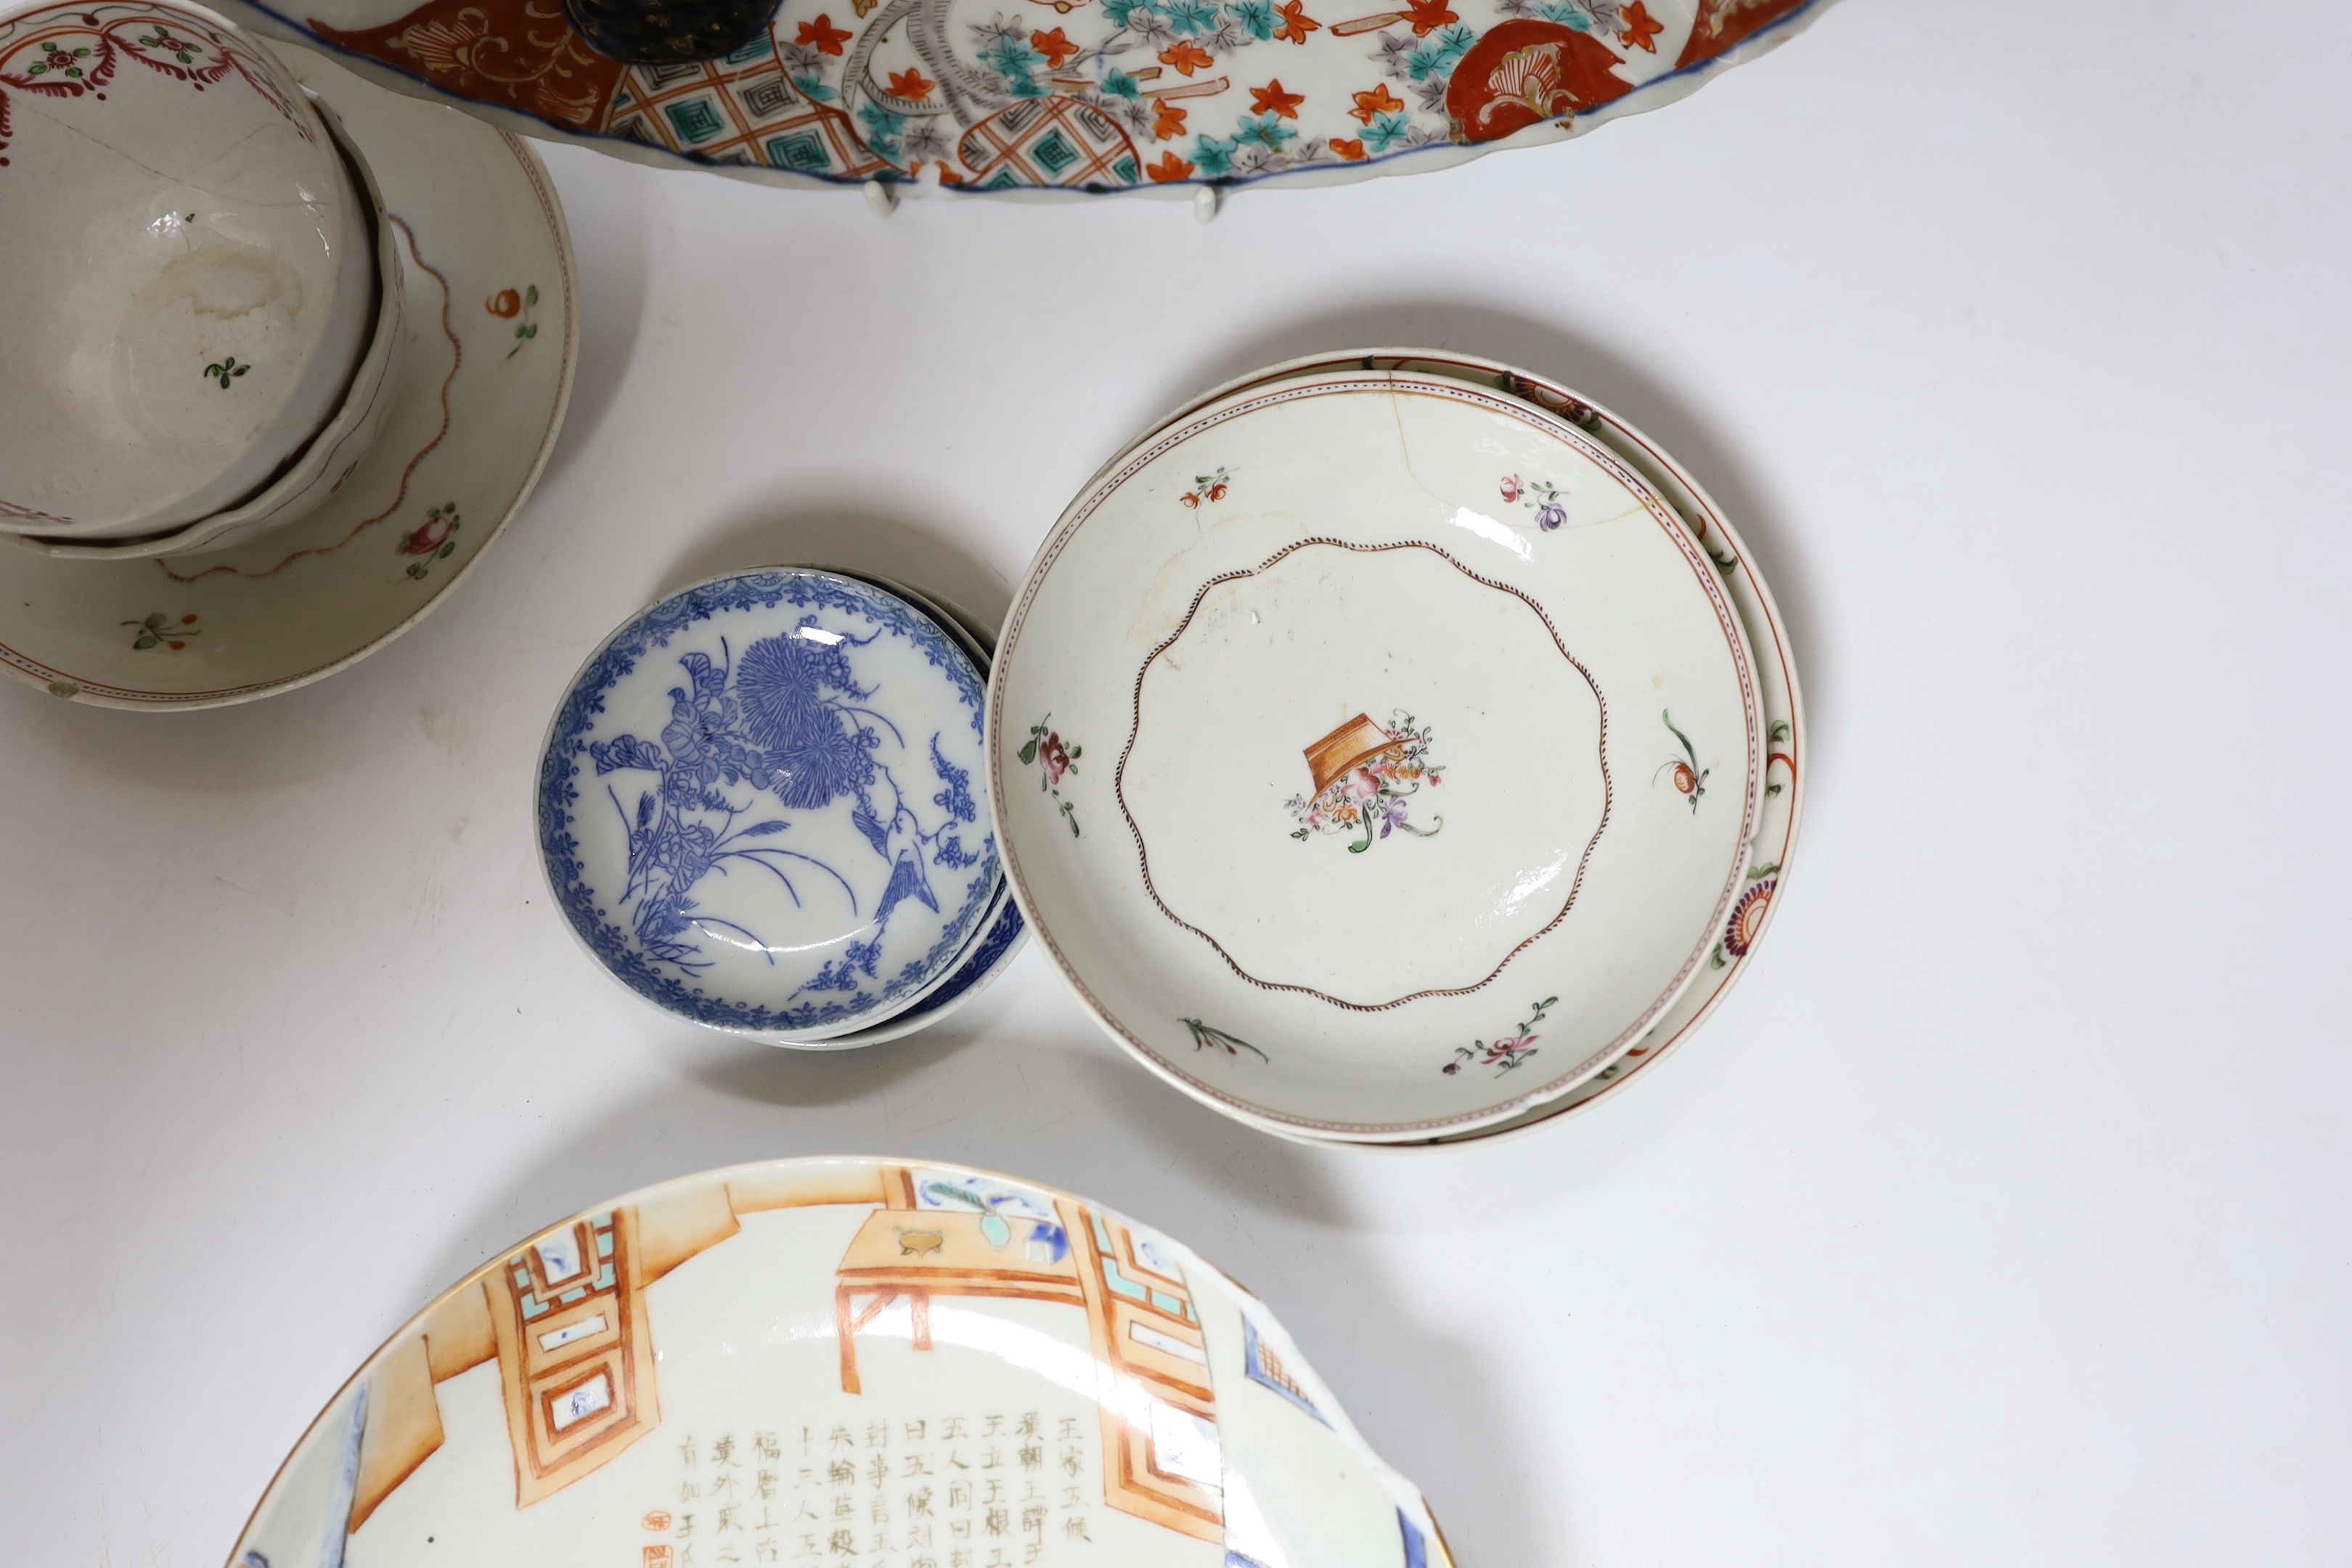 Two Chinese tea bowls and saucers two plates etc plates 25cm diameter - Image 5 of 5